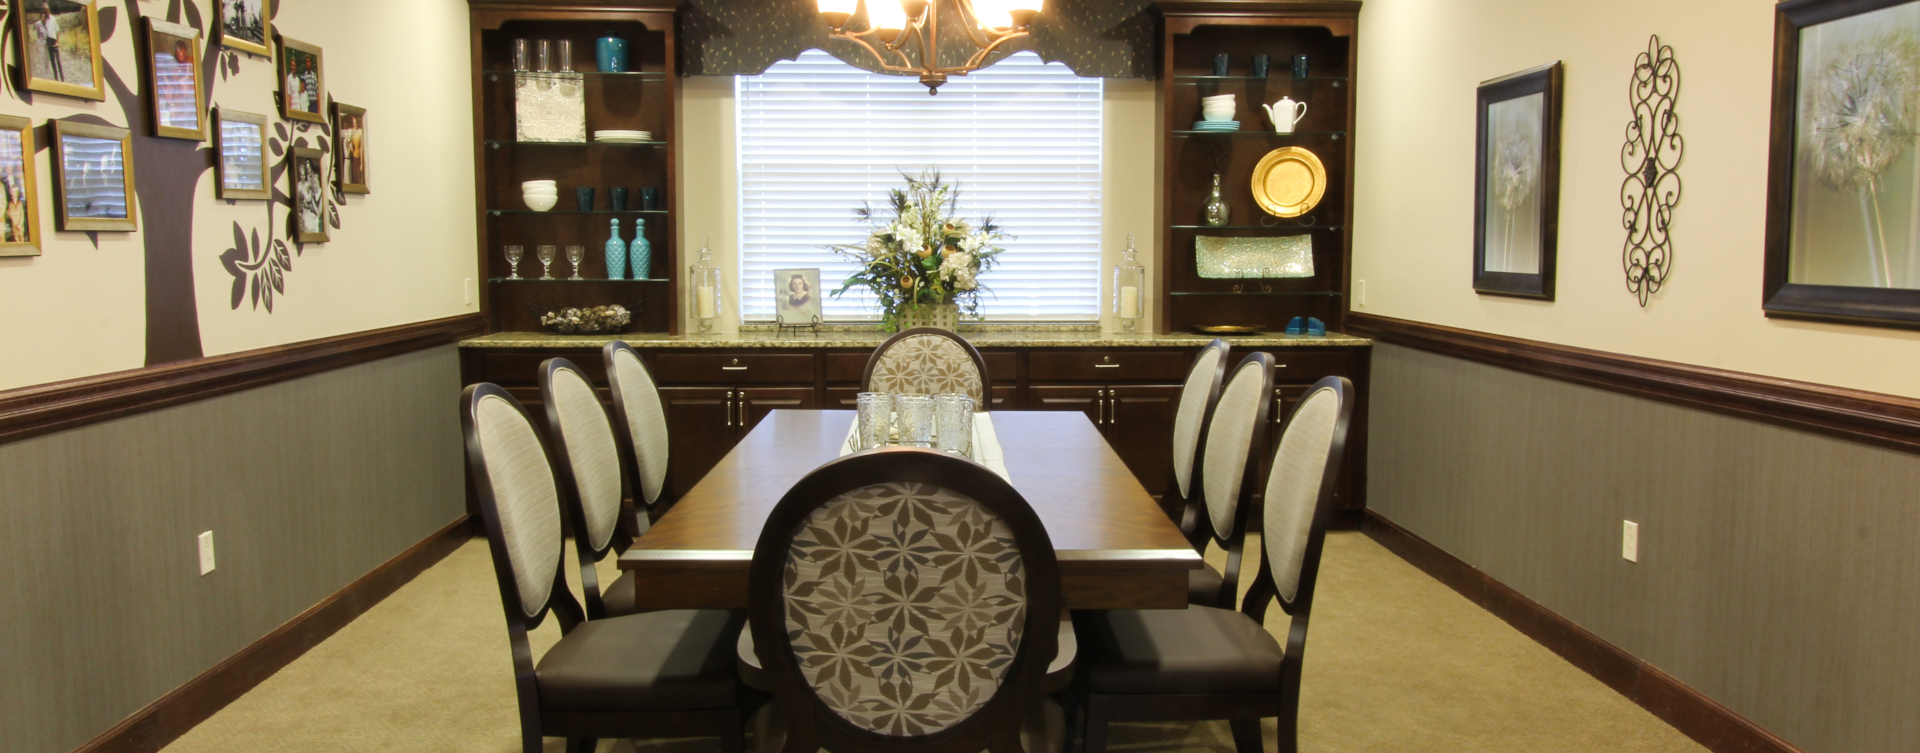 Celebrate special occasions in the private dining room at Bickford of Tinley Park